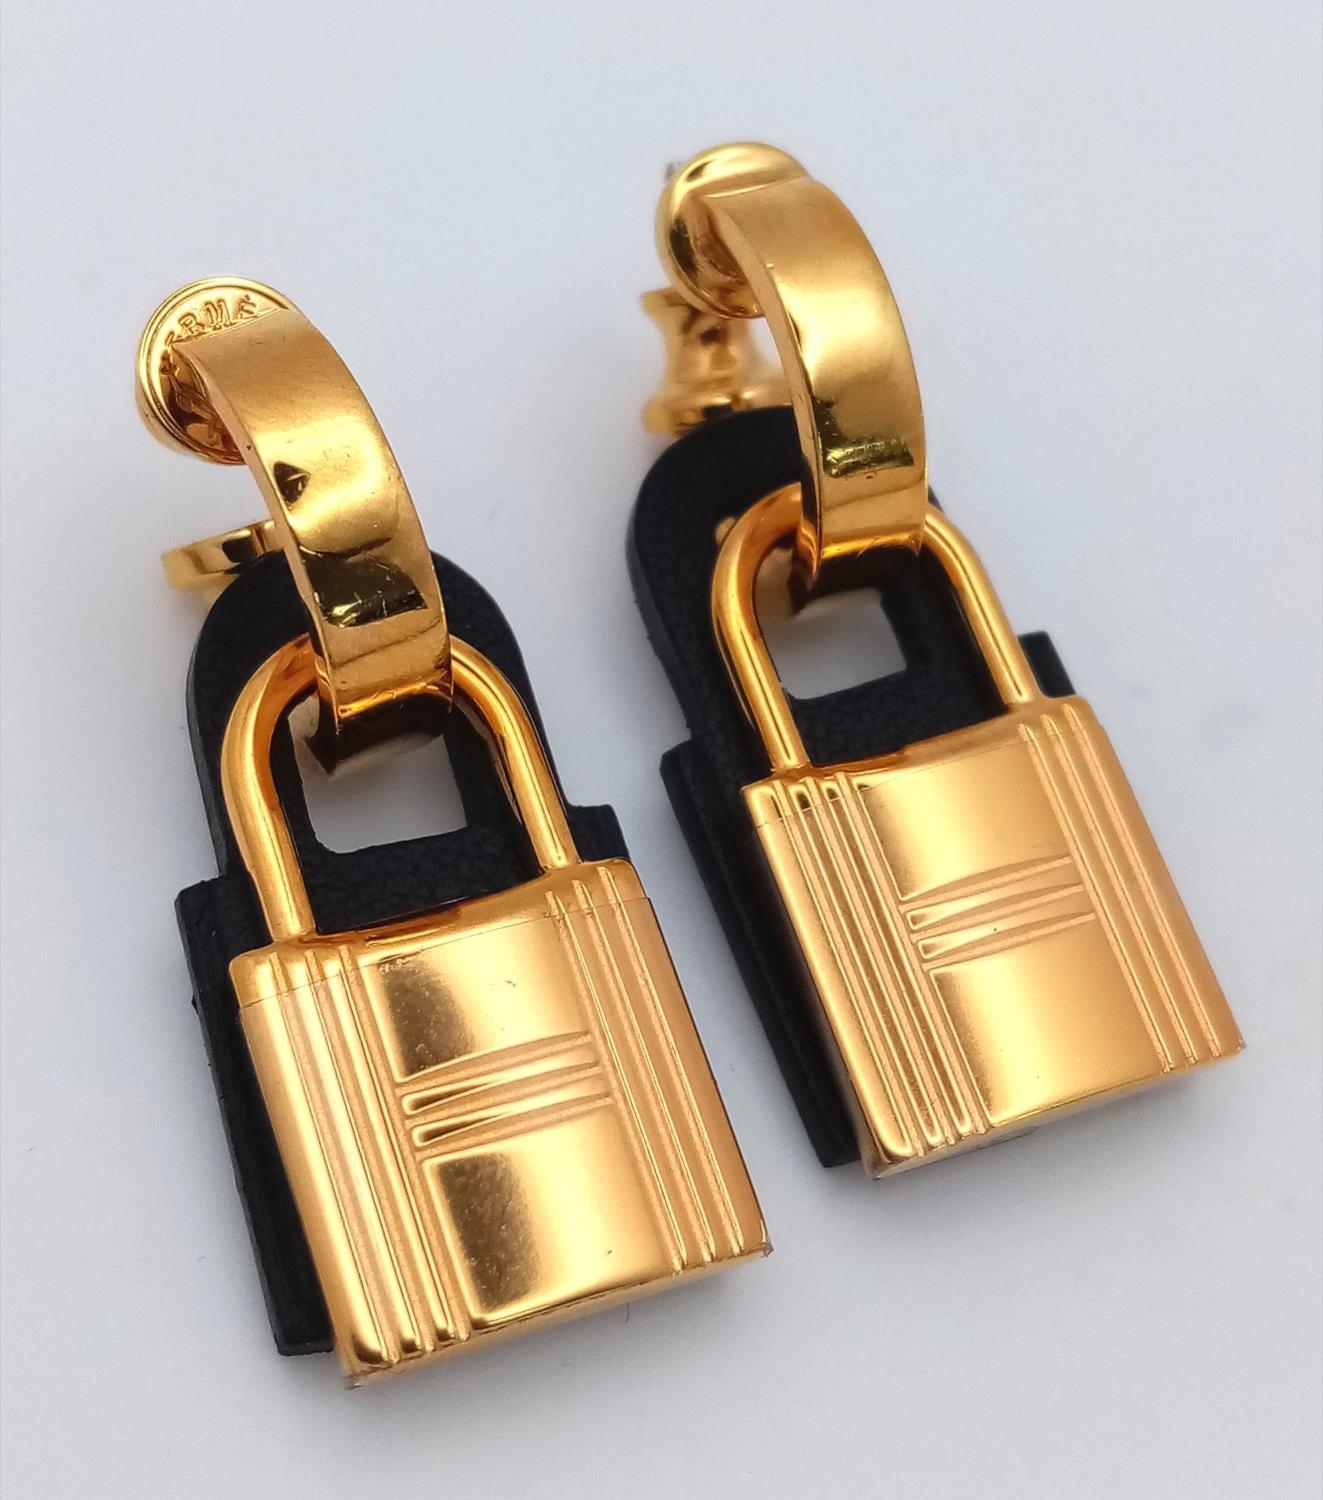 A Pair of Designer Gold Plated Hermes Padlock Earrings. Comes with original packaging. - Image 2 of 7